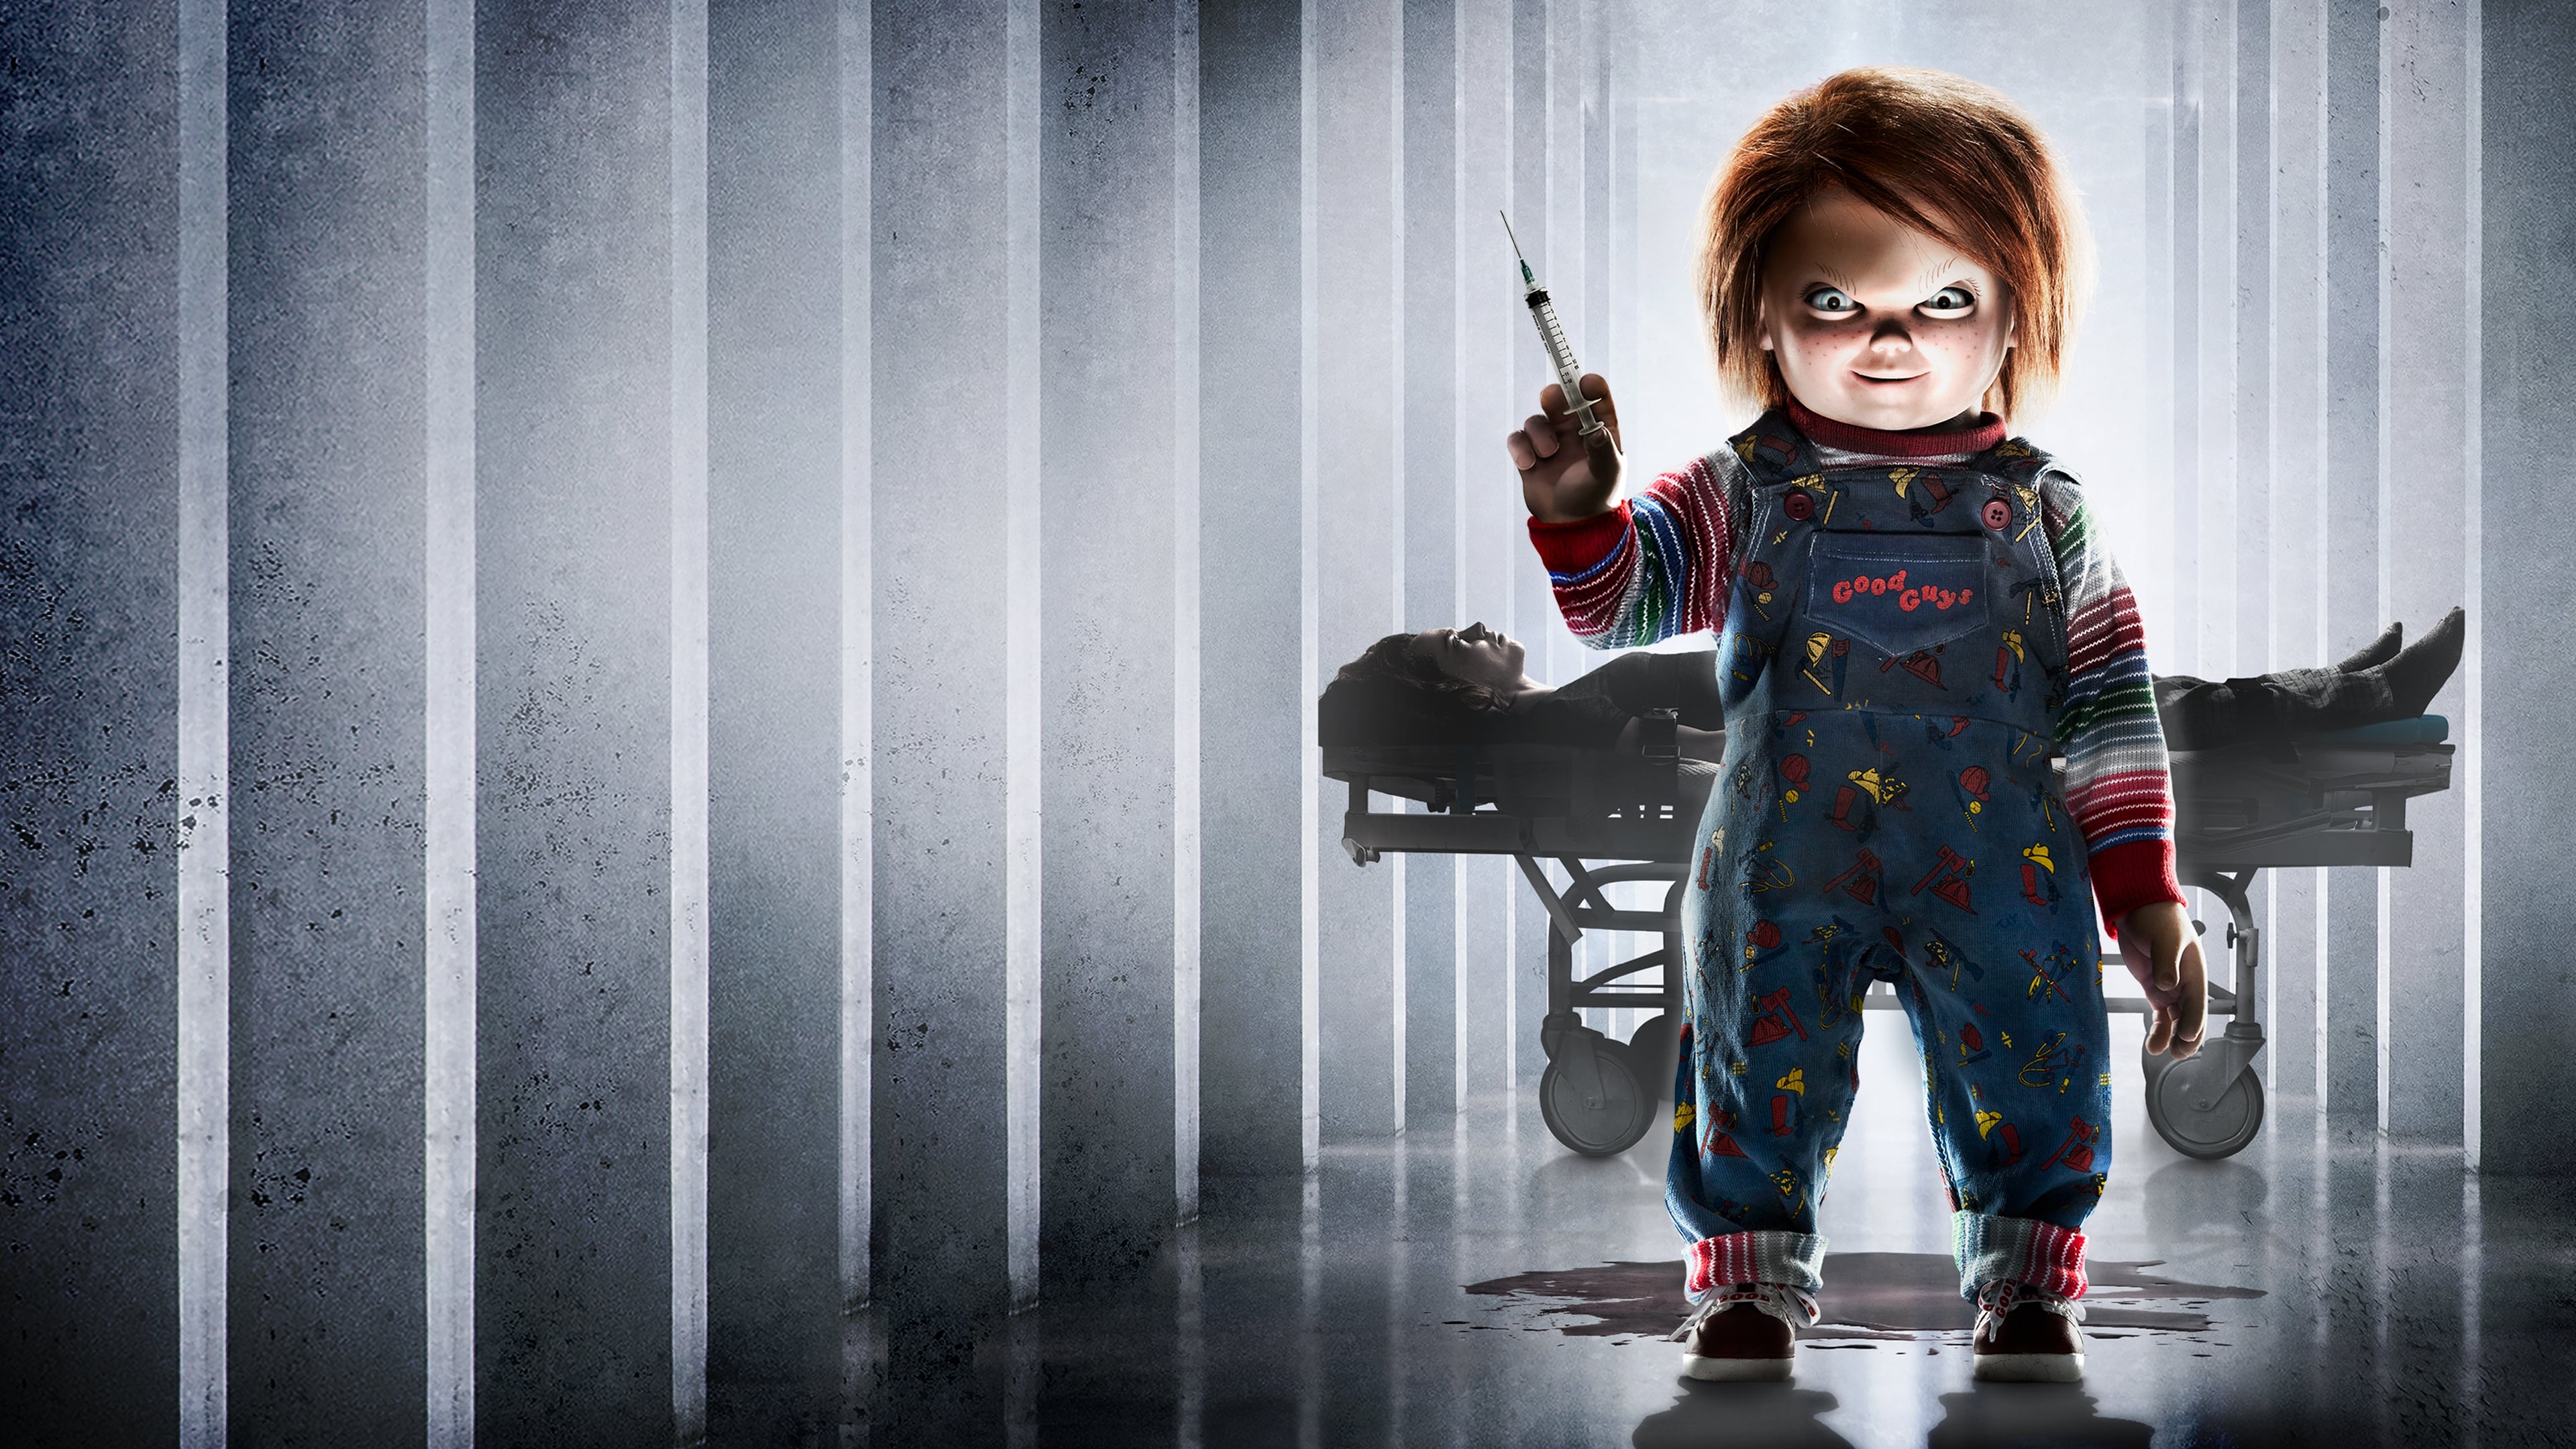 Cult of Chucky 2017 123movies